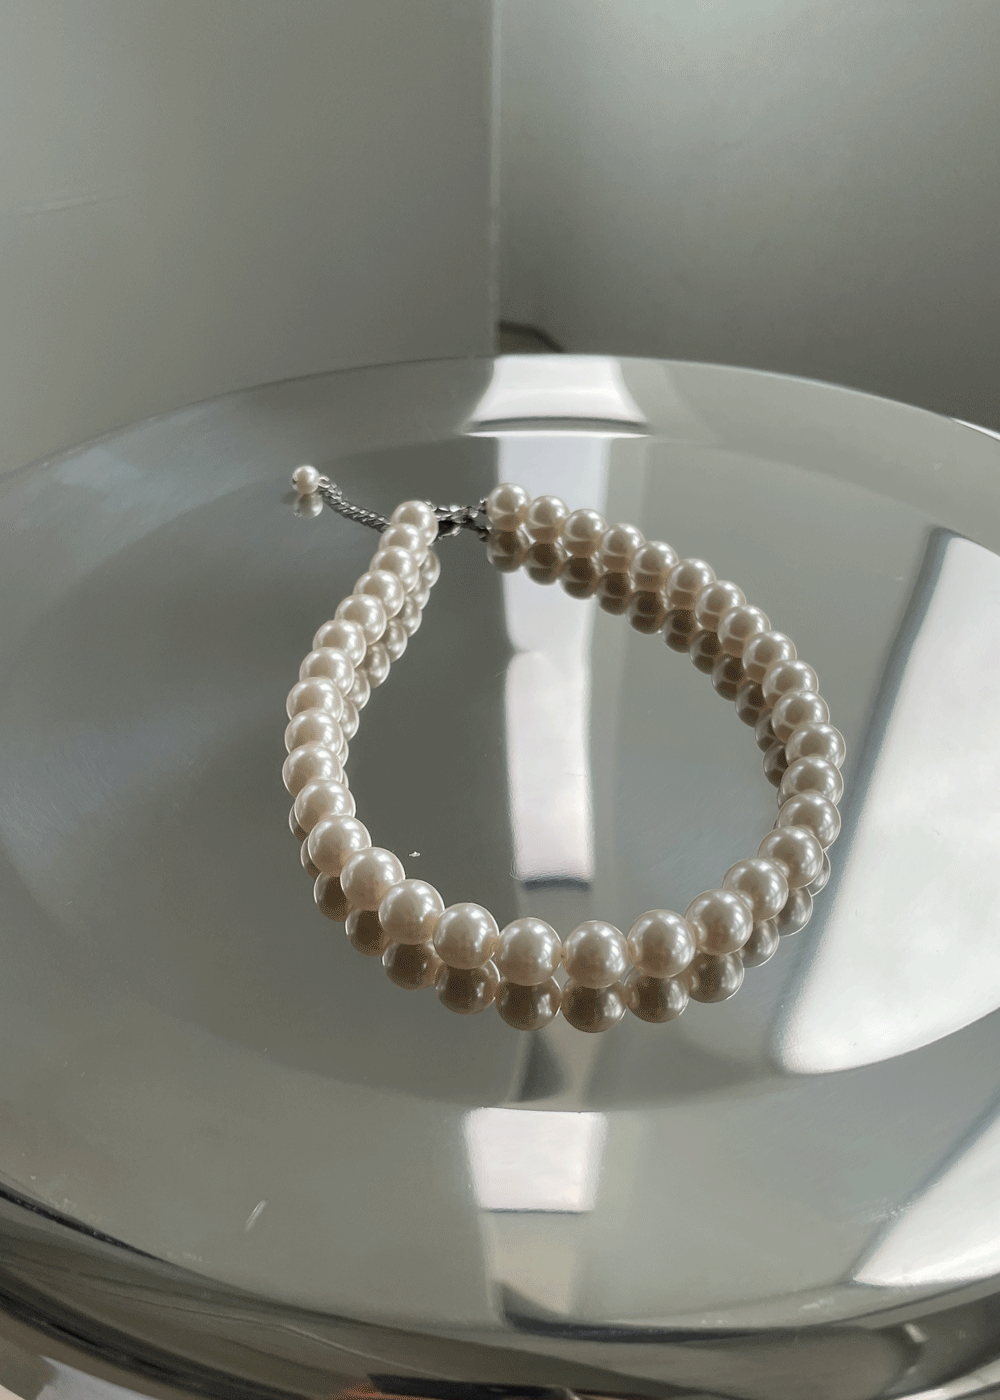 9mm pearl necklace